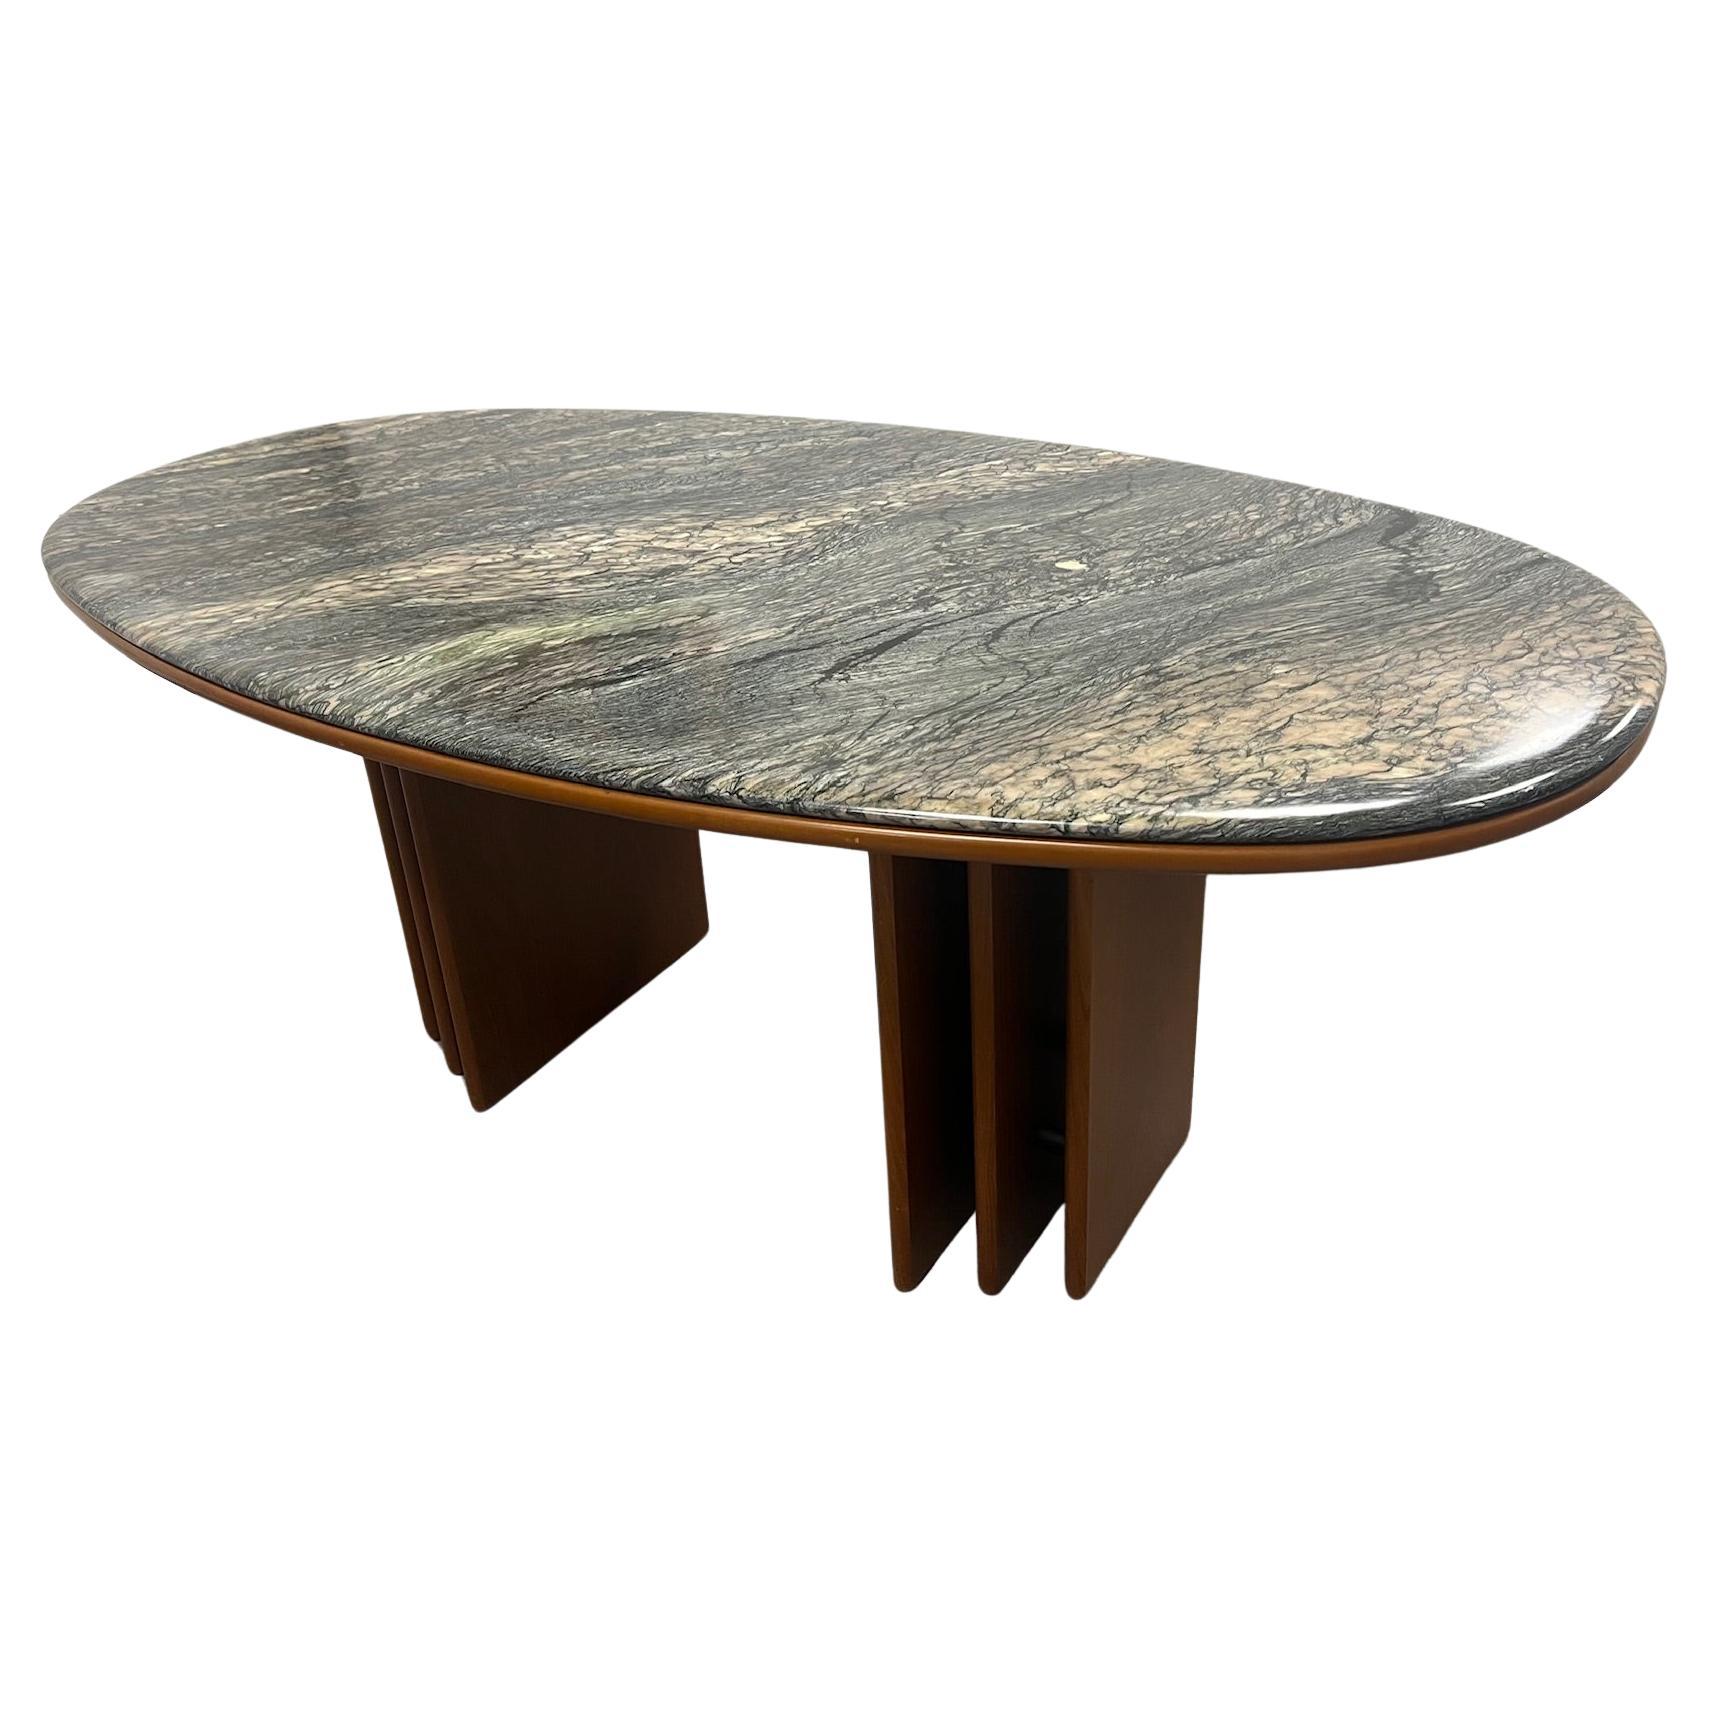 Mid Century Danish Modern Oval Teak And Marble Dining Table By Bendixen Denmark For Sale